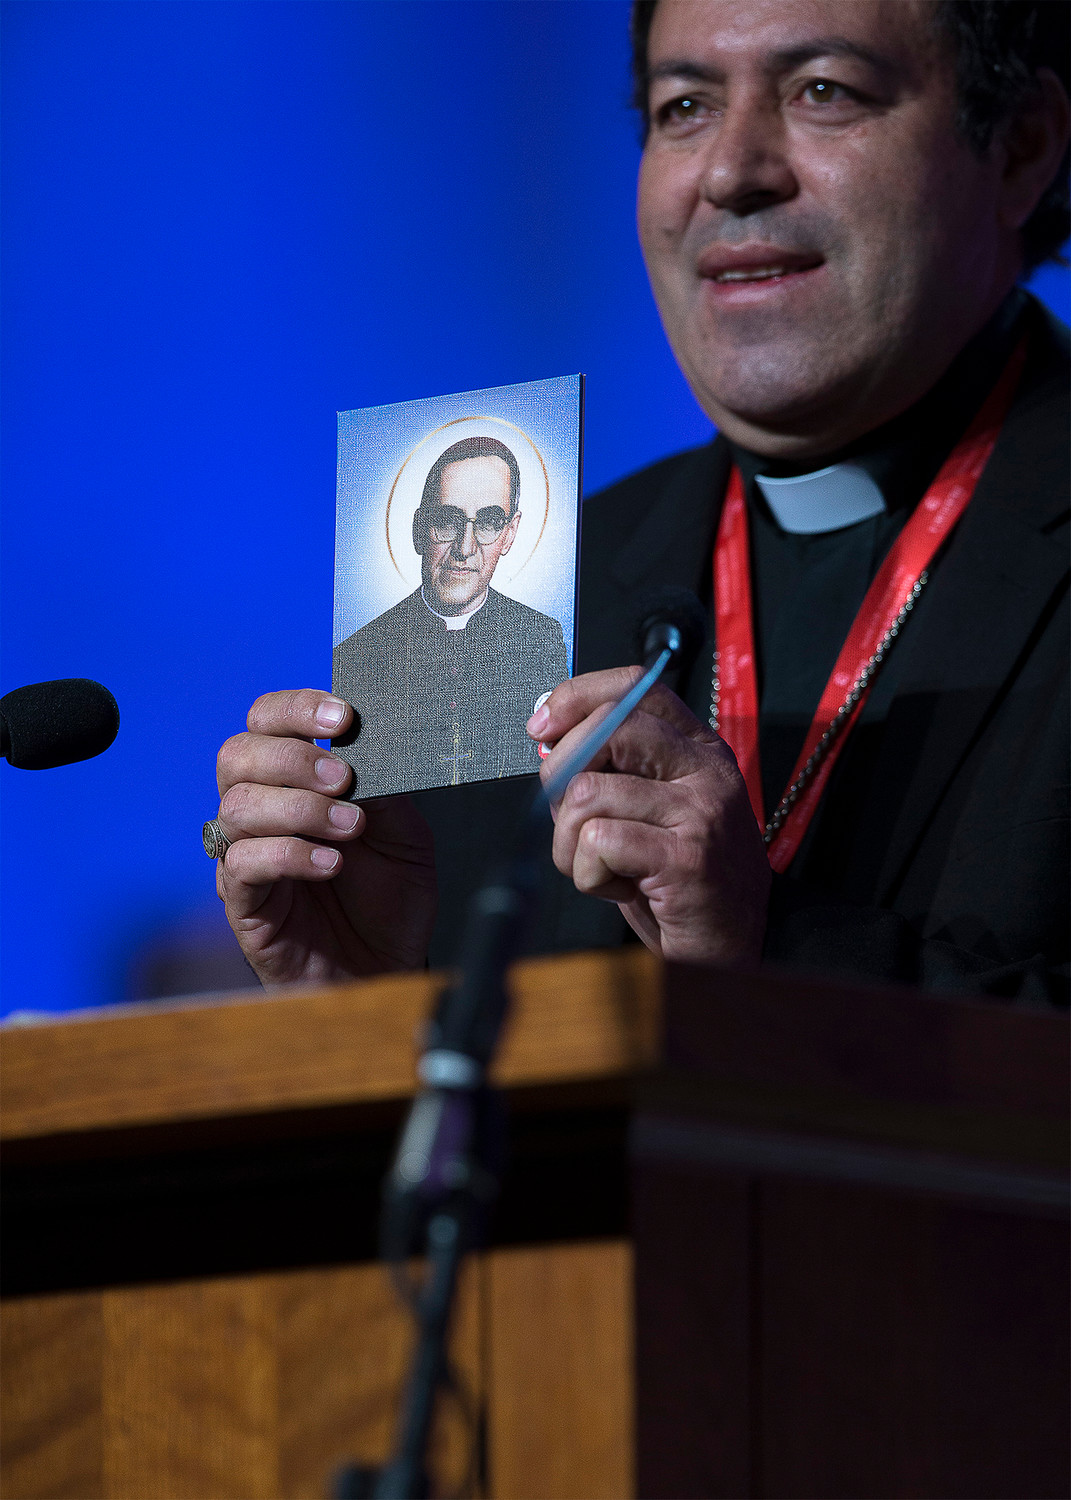 Bishop Constantino Barrera Morales of Sonsonate, El Salvador, talks about the Oct. 14 canonization of Blessed Oscar Romero during a Sept. 23 presentation at the Fifth National Encuentro in Grapevine, Texas.